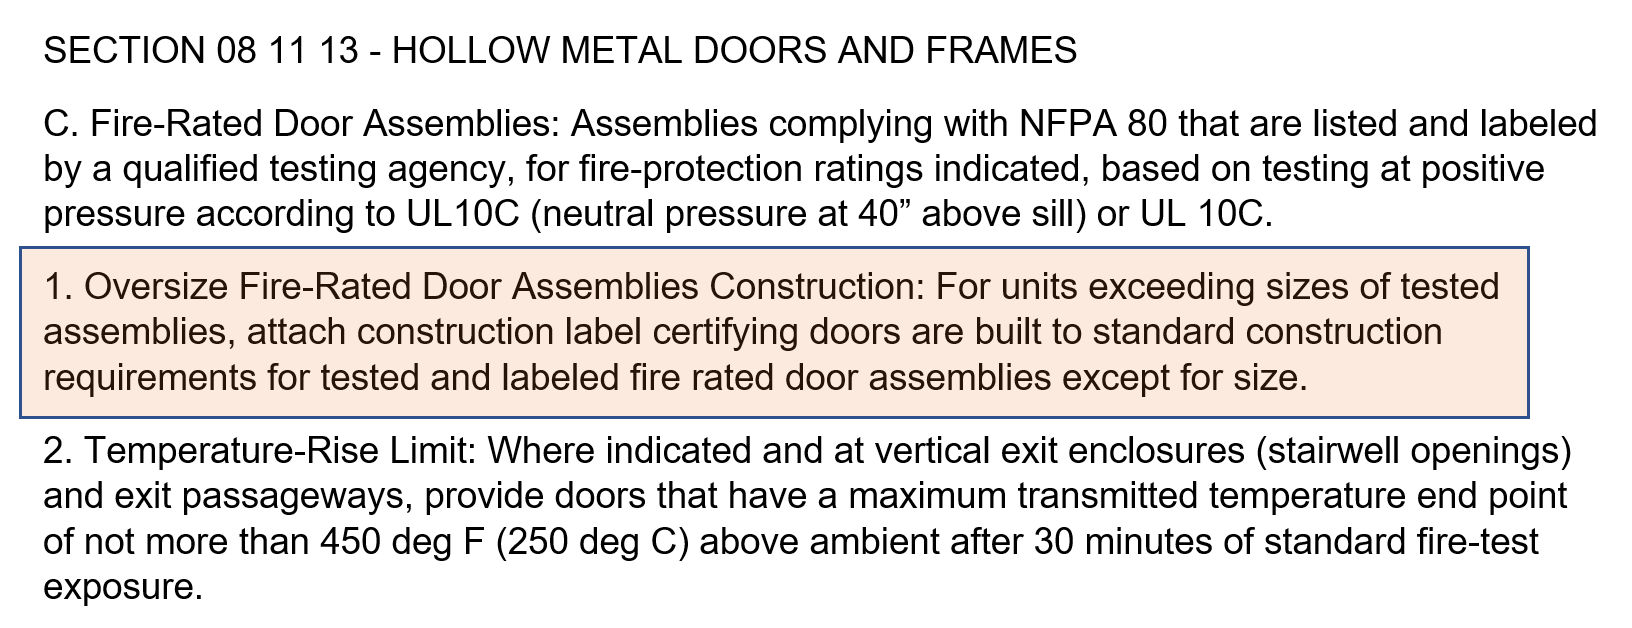 Fire Rated Door Labels / Ratings - Archtoolbox